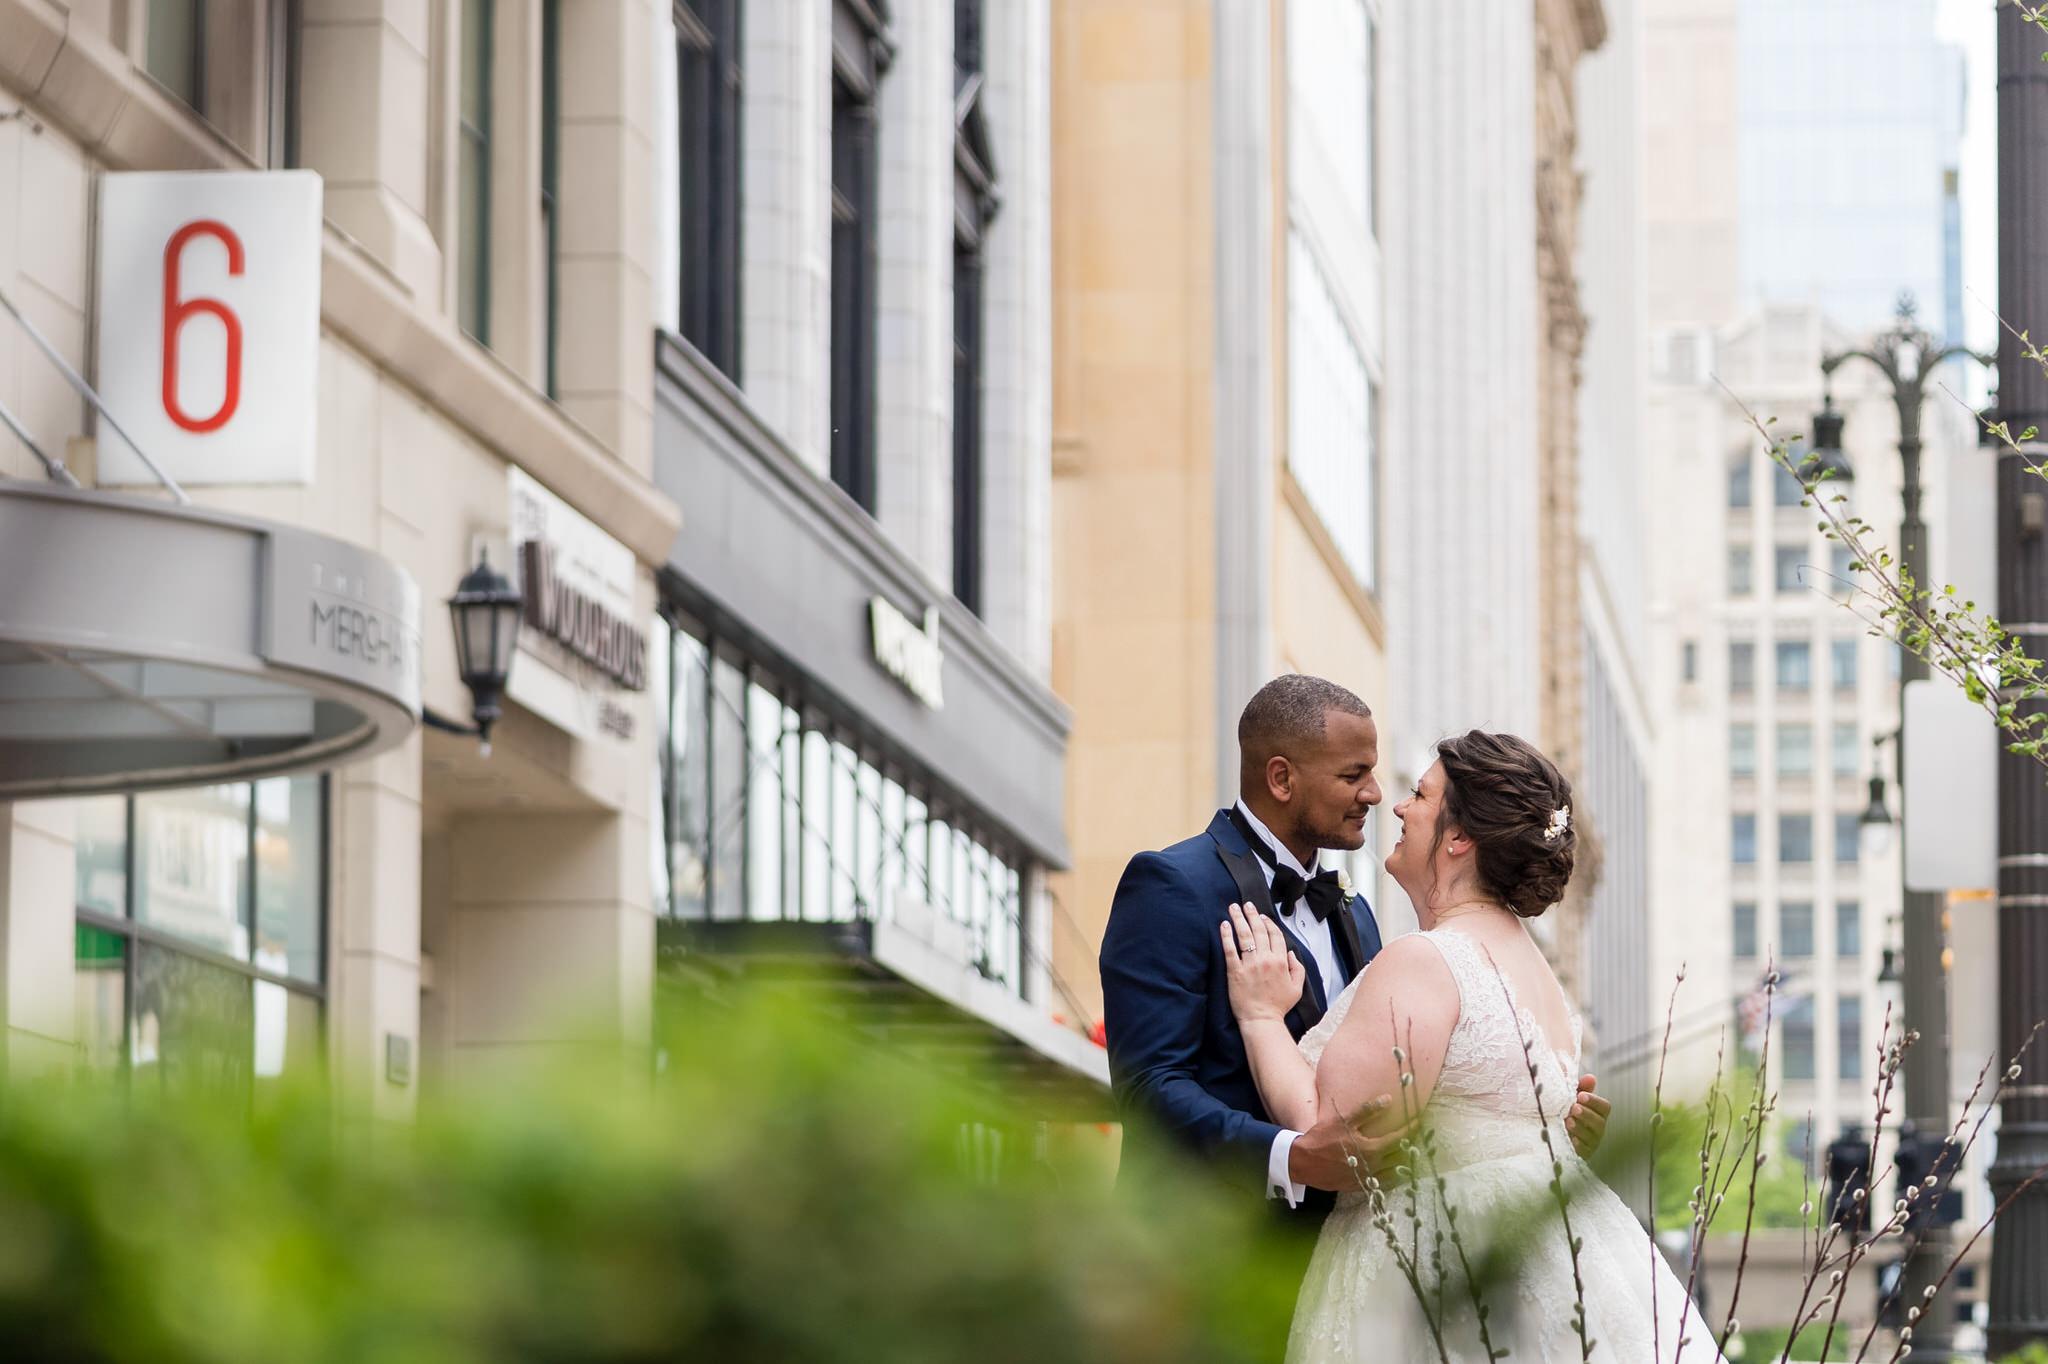 a bride and groom look at each other on a city street